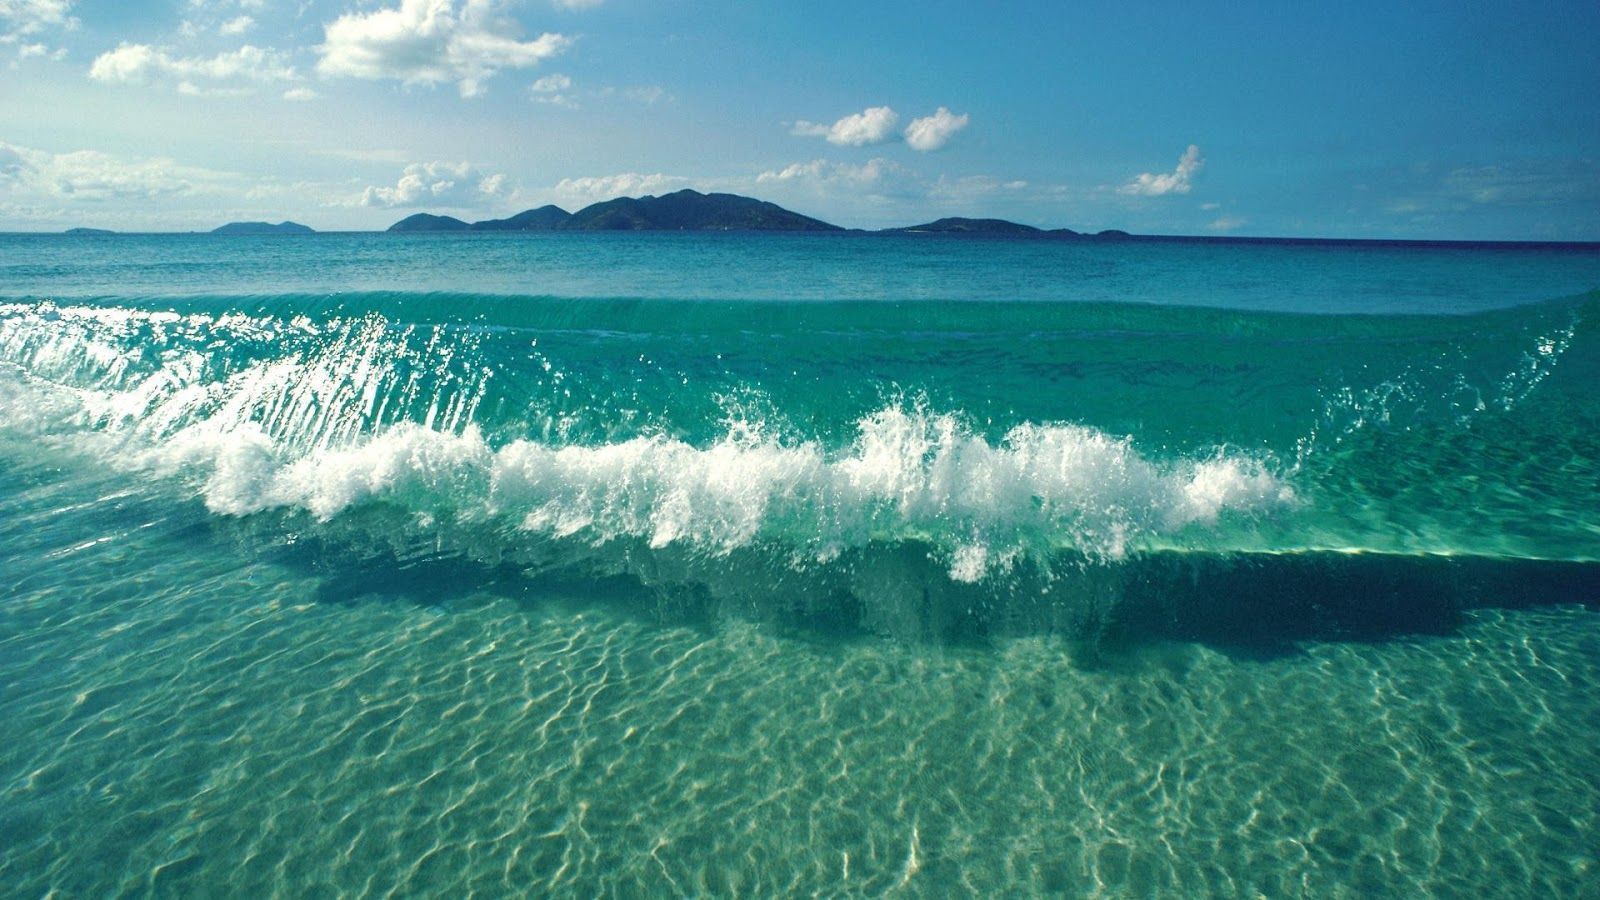 Download Free Ocean Waves Wallpapers Most beautiful places in